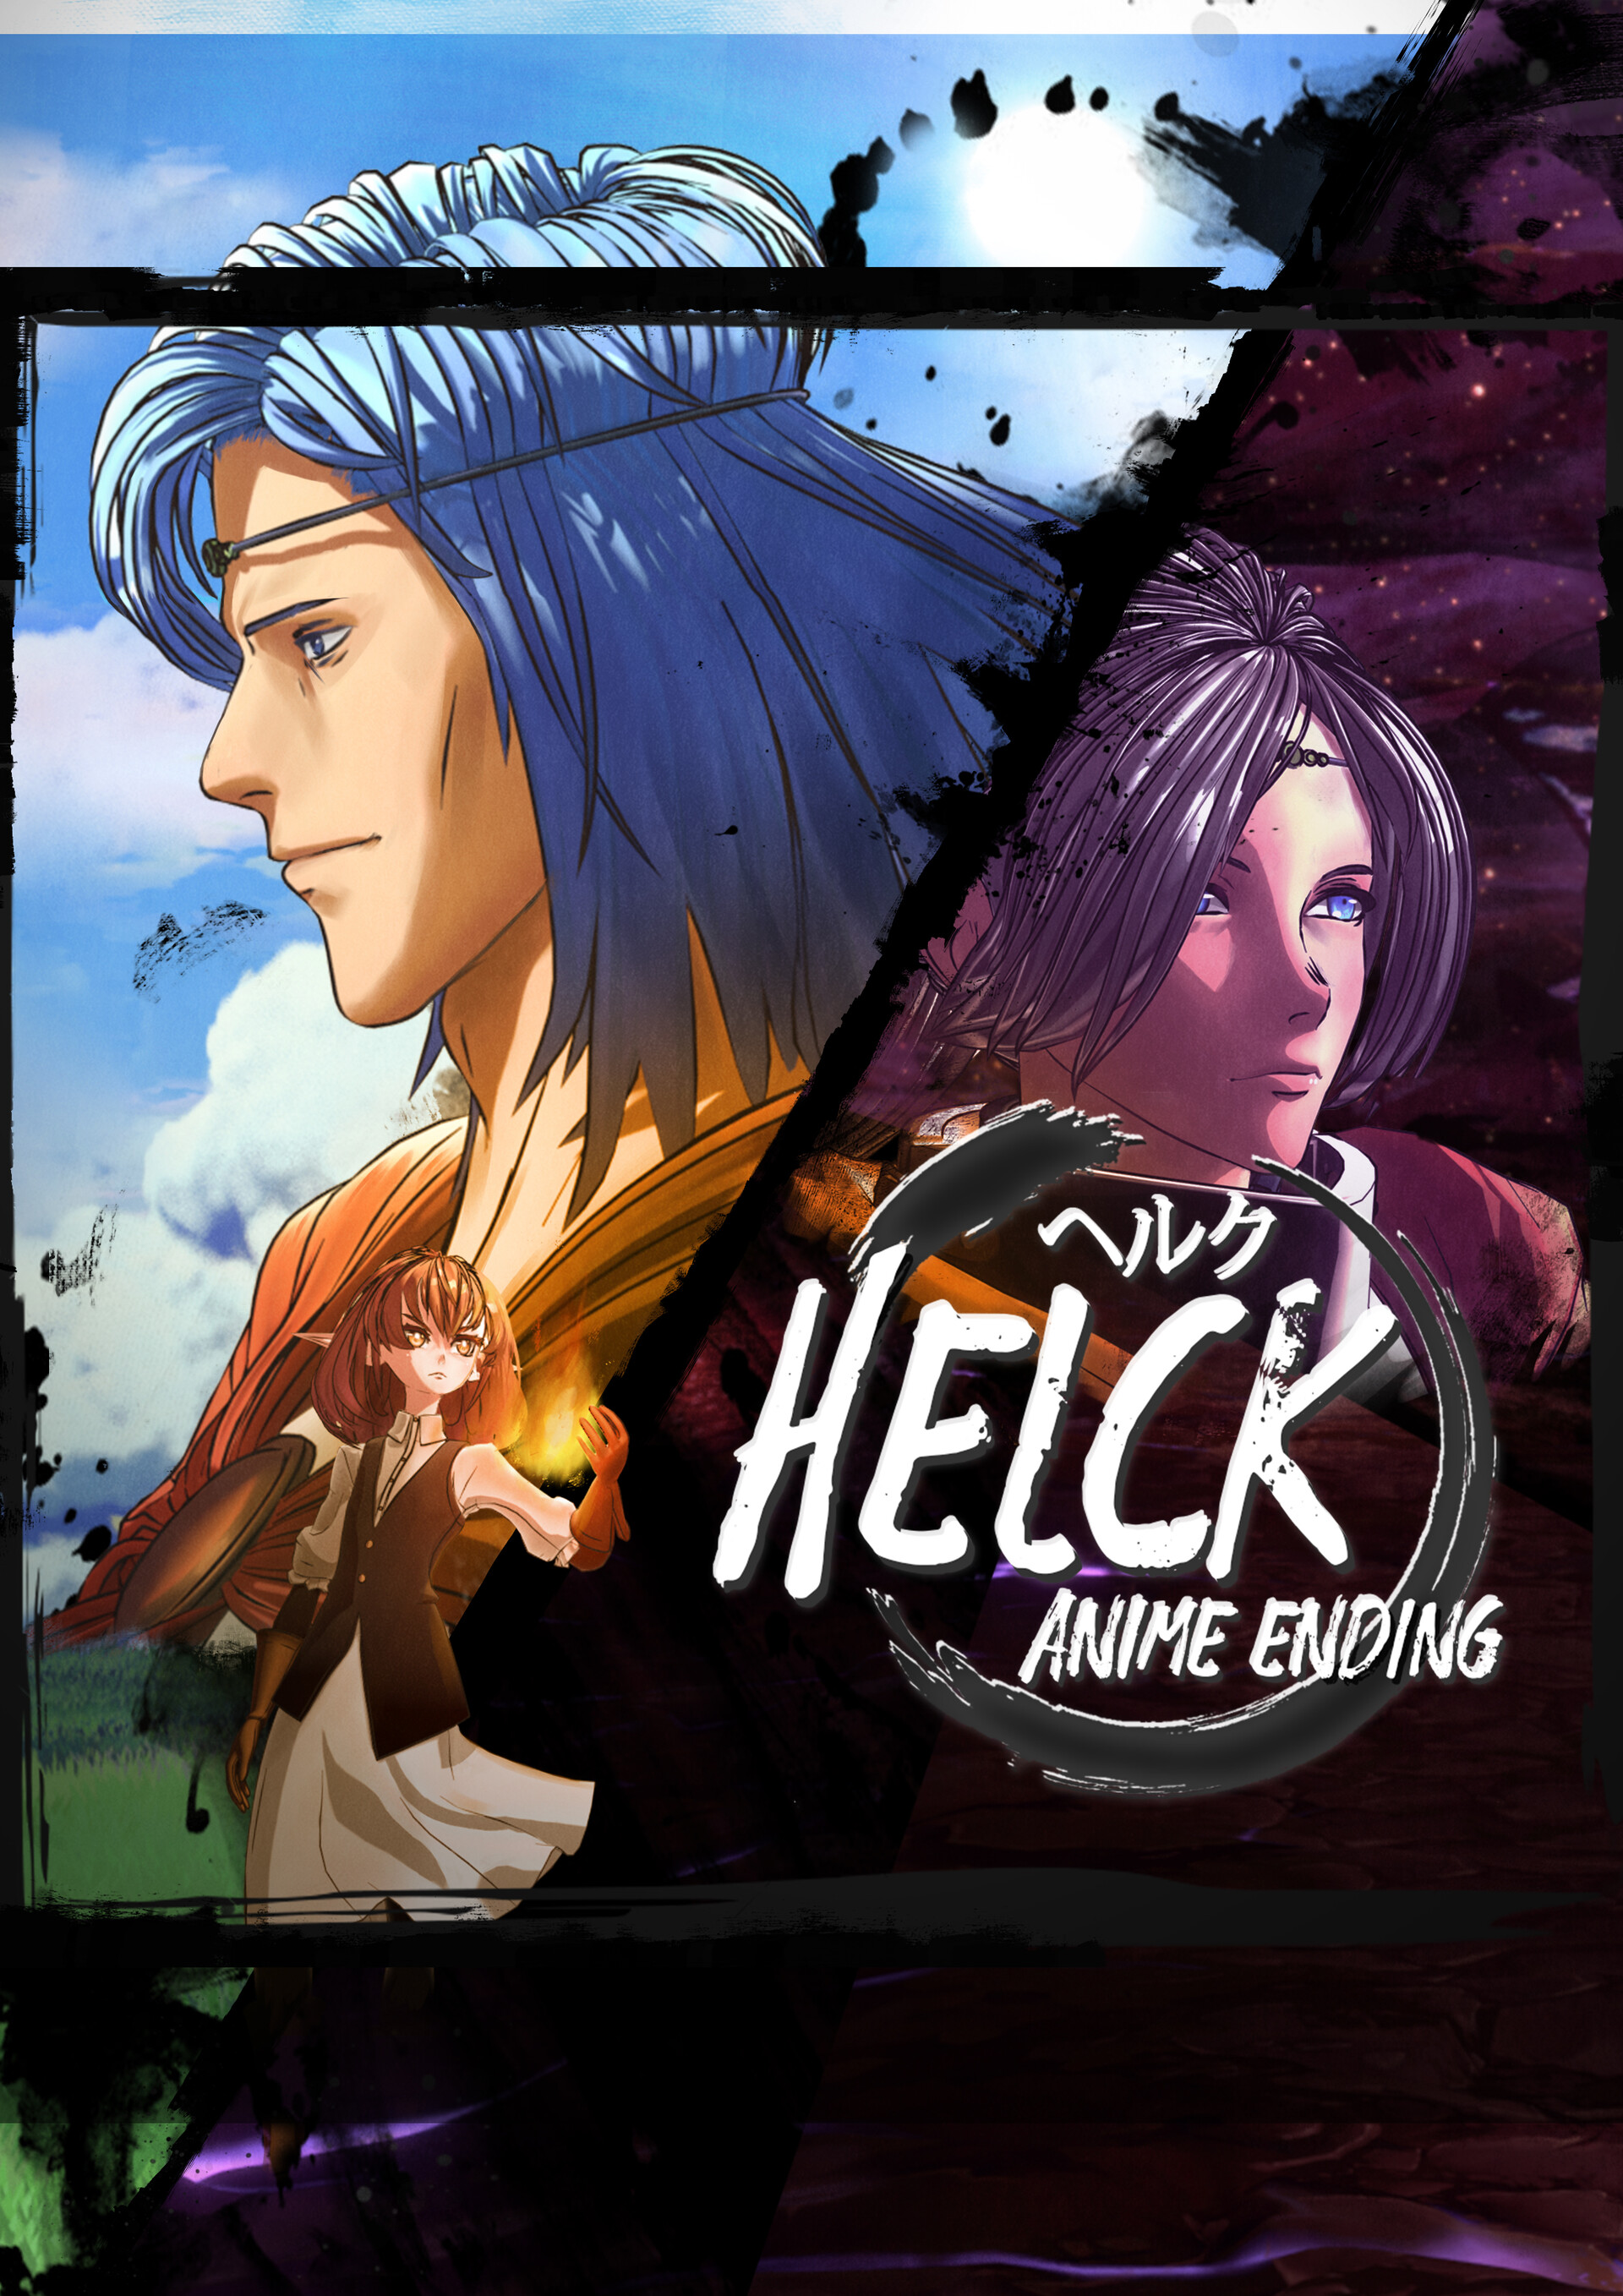 Helck anime in 3 days by ibumuc on DeviantArt